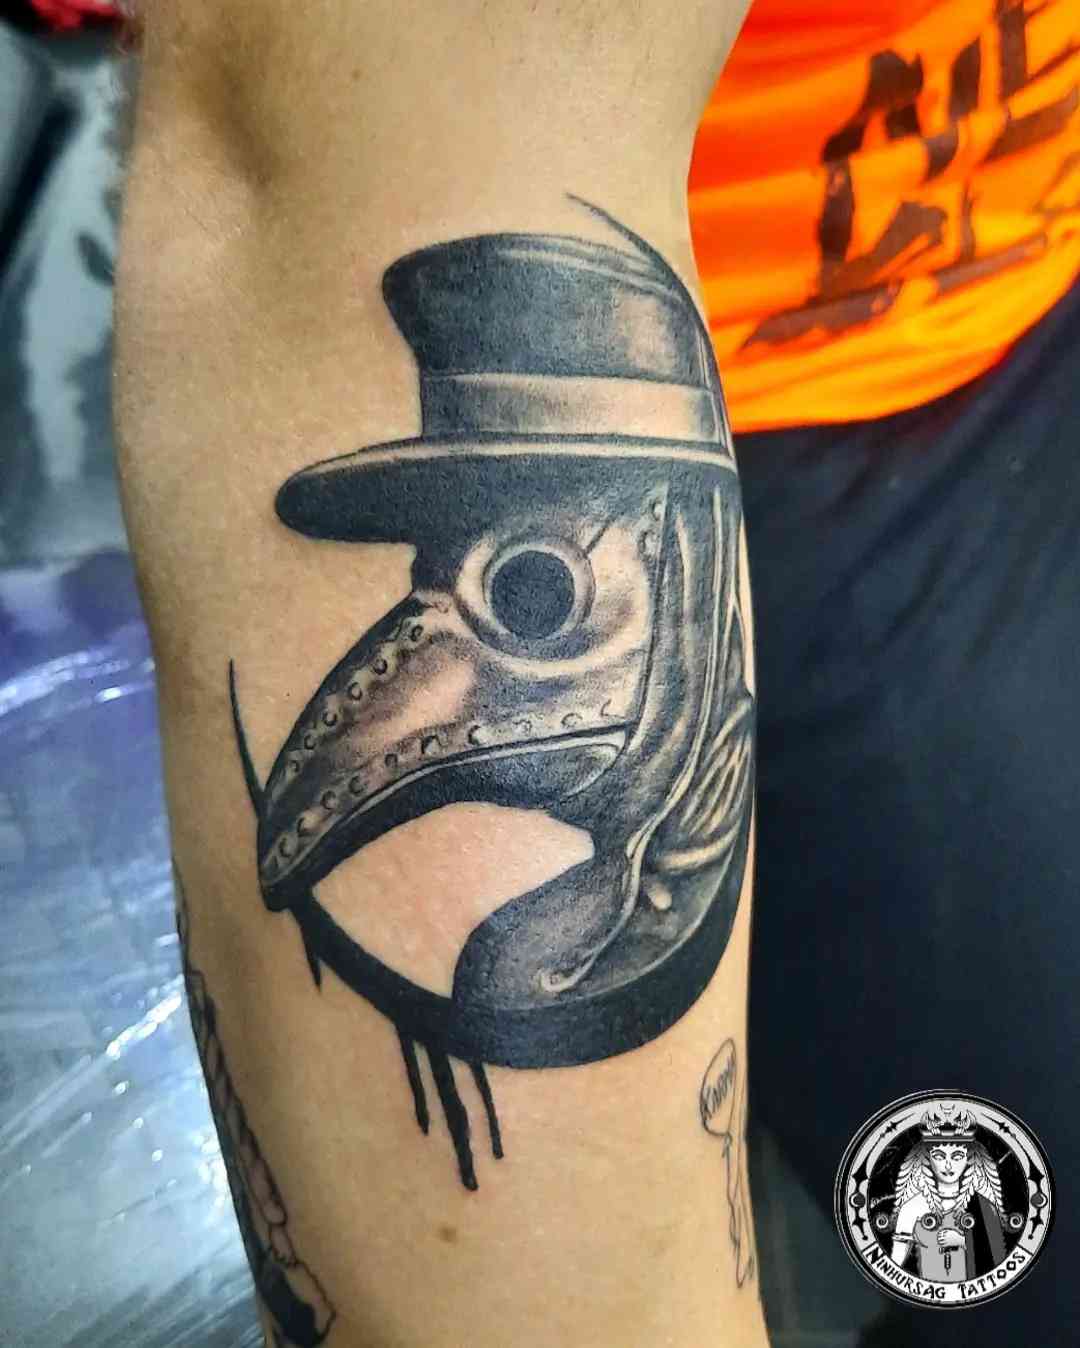 Freehand Neo Trad Plague Doctor forearm piece done by Daragh Locke of Black  Valley Tattoo Gallery in Limerick Ireland   rtattoo